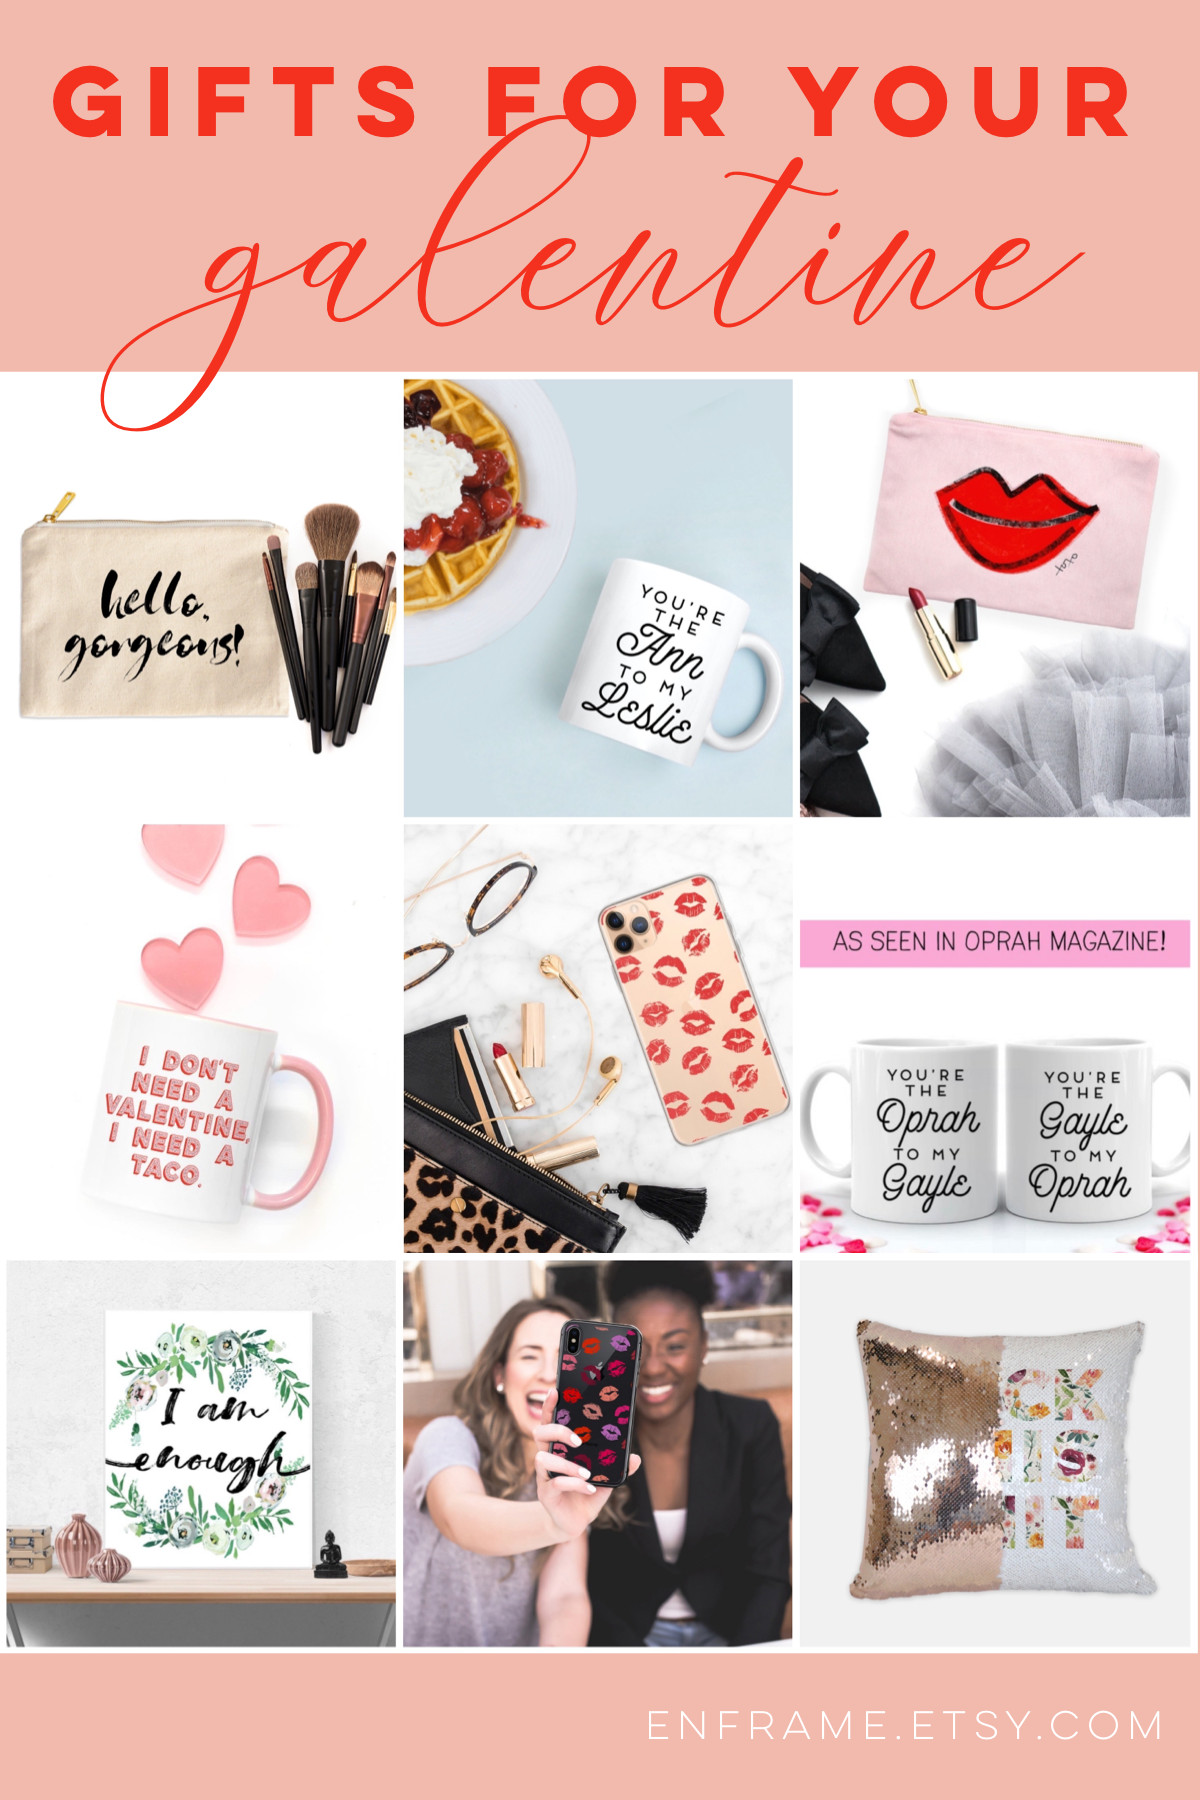 Valentines Gift Ideas 2020
 Gift Ideas for your Galentine in 2020